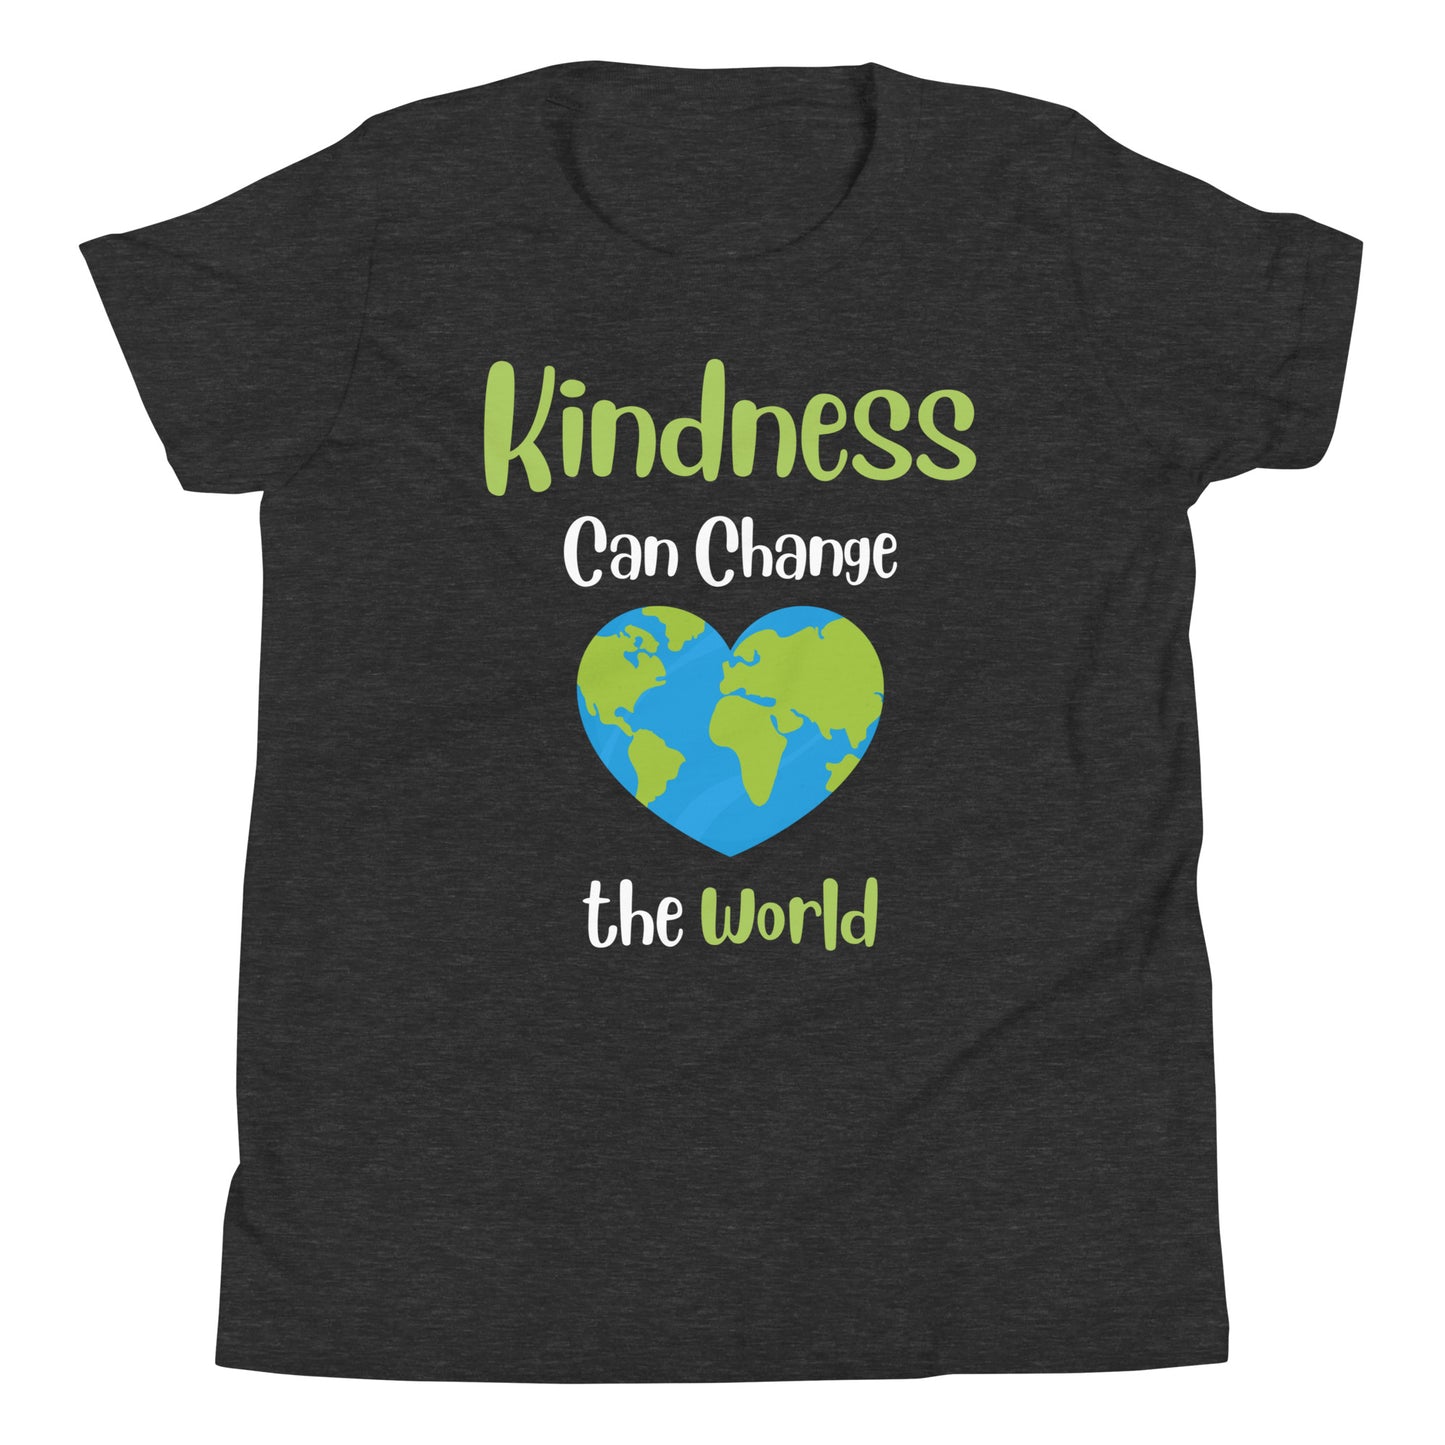 Kindness Can Change the World Quality Cotton Bella Canvas Youth T-Shirt